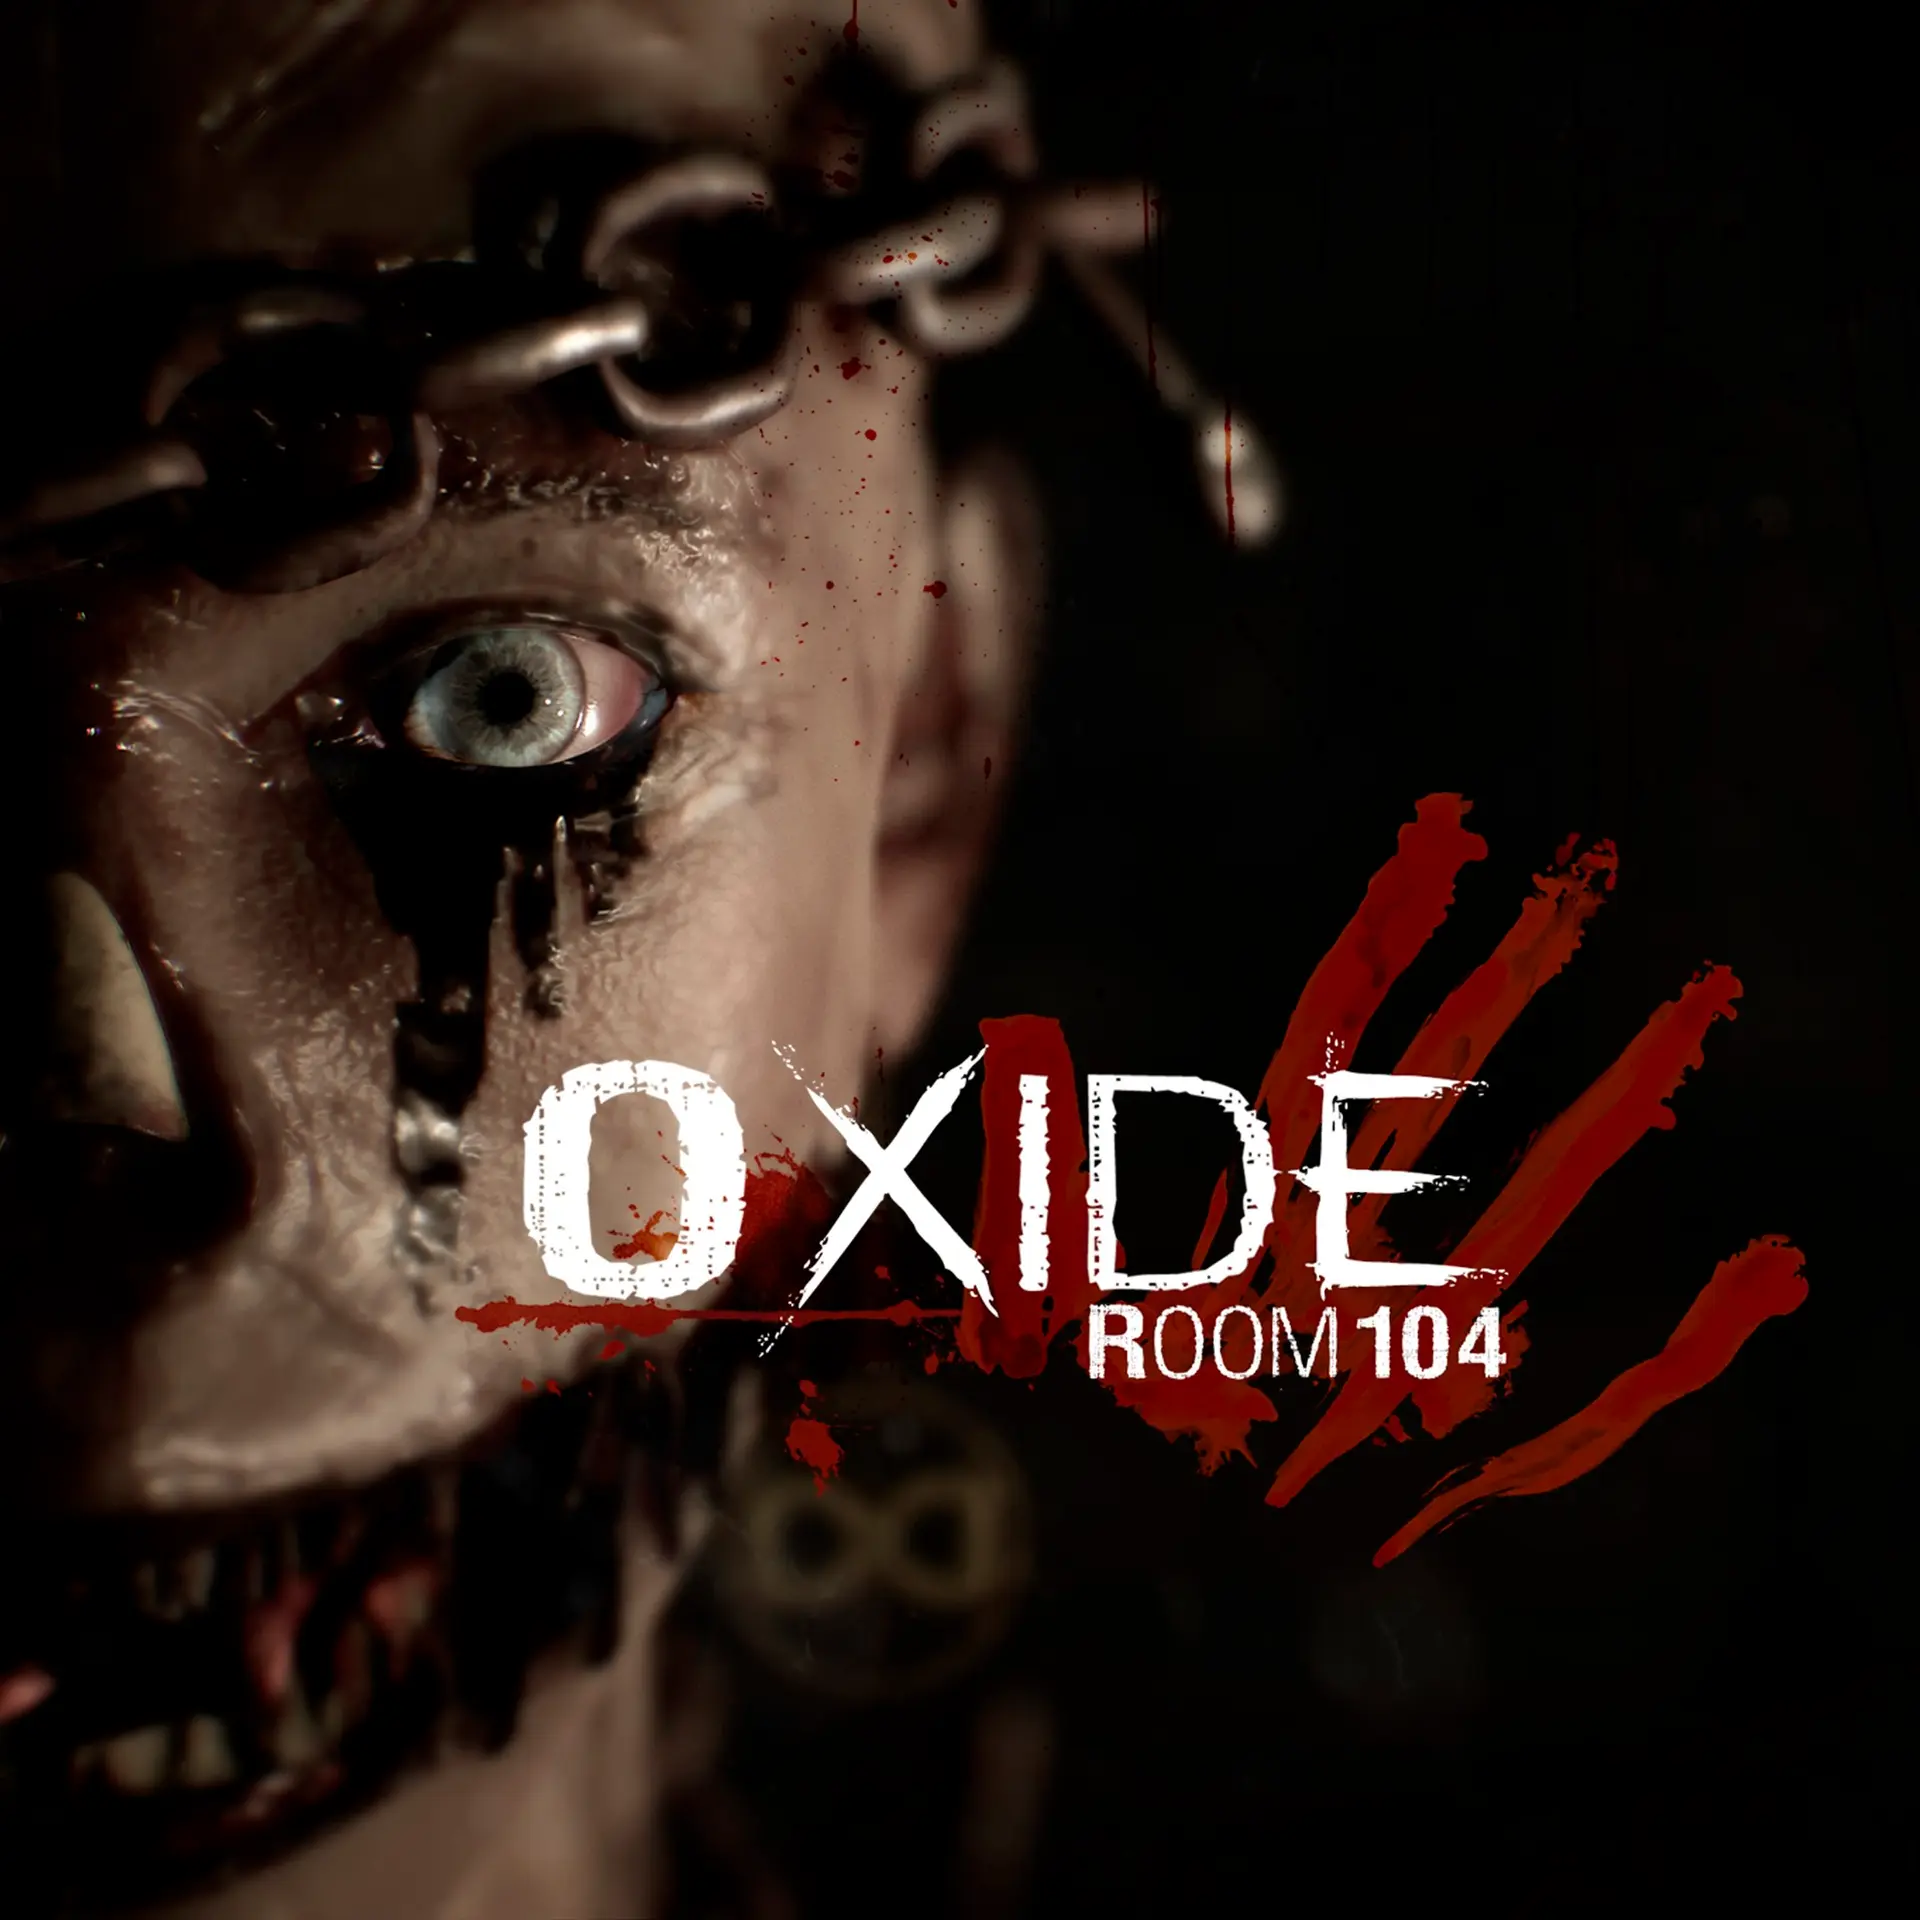 Oxide Room 104 (Xbox Games BR)